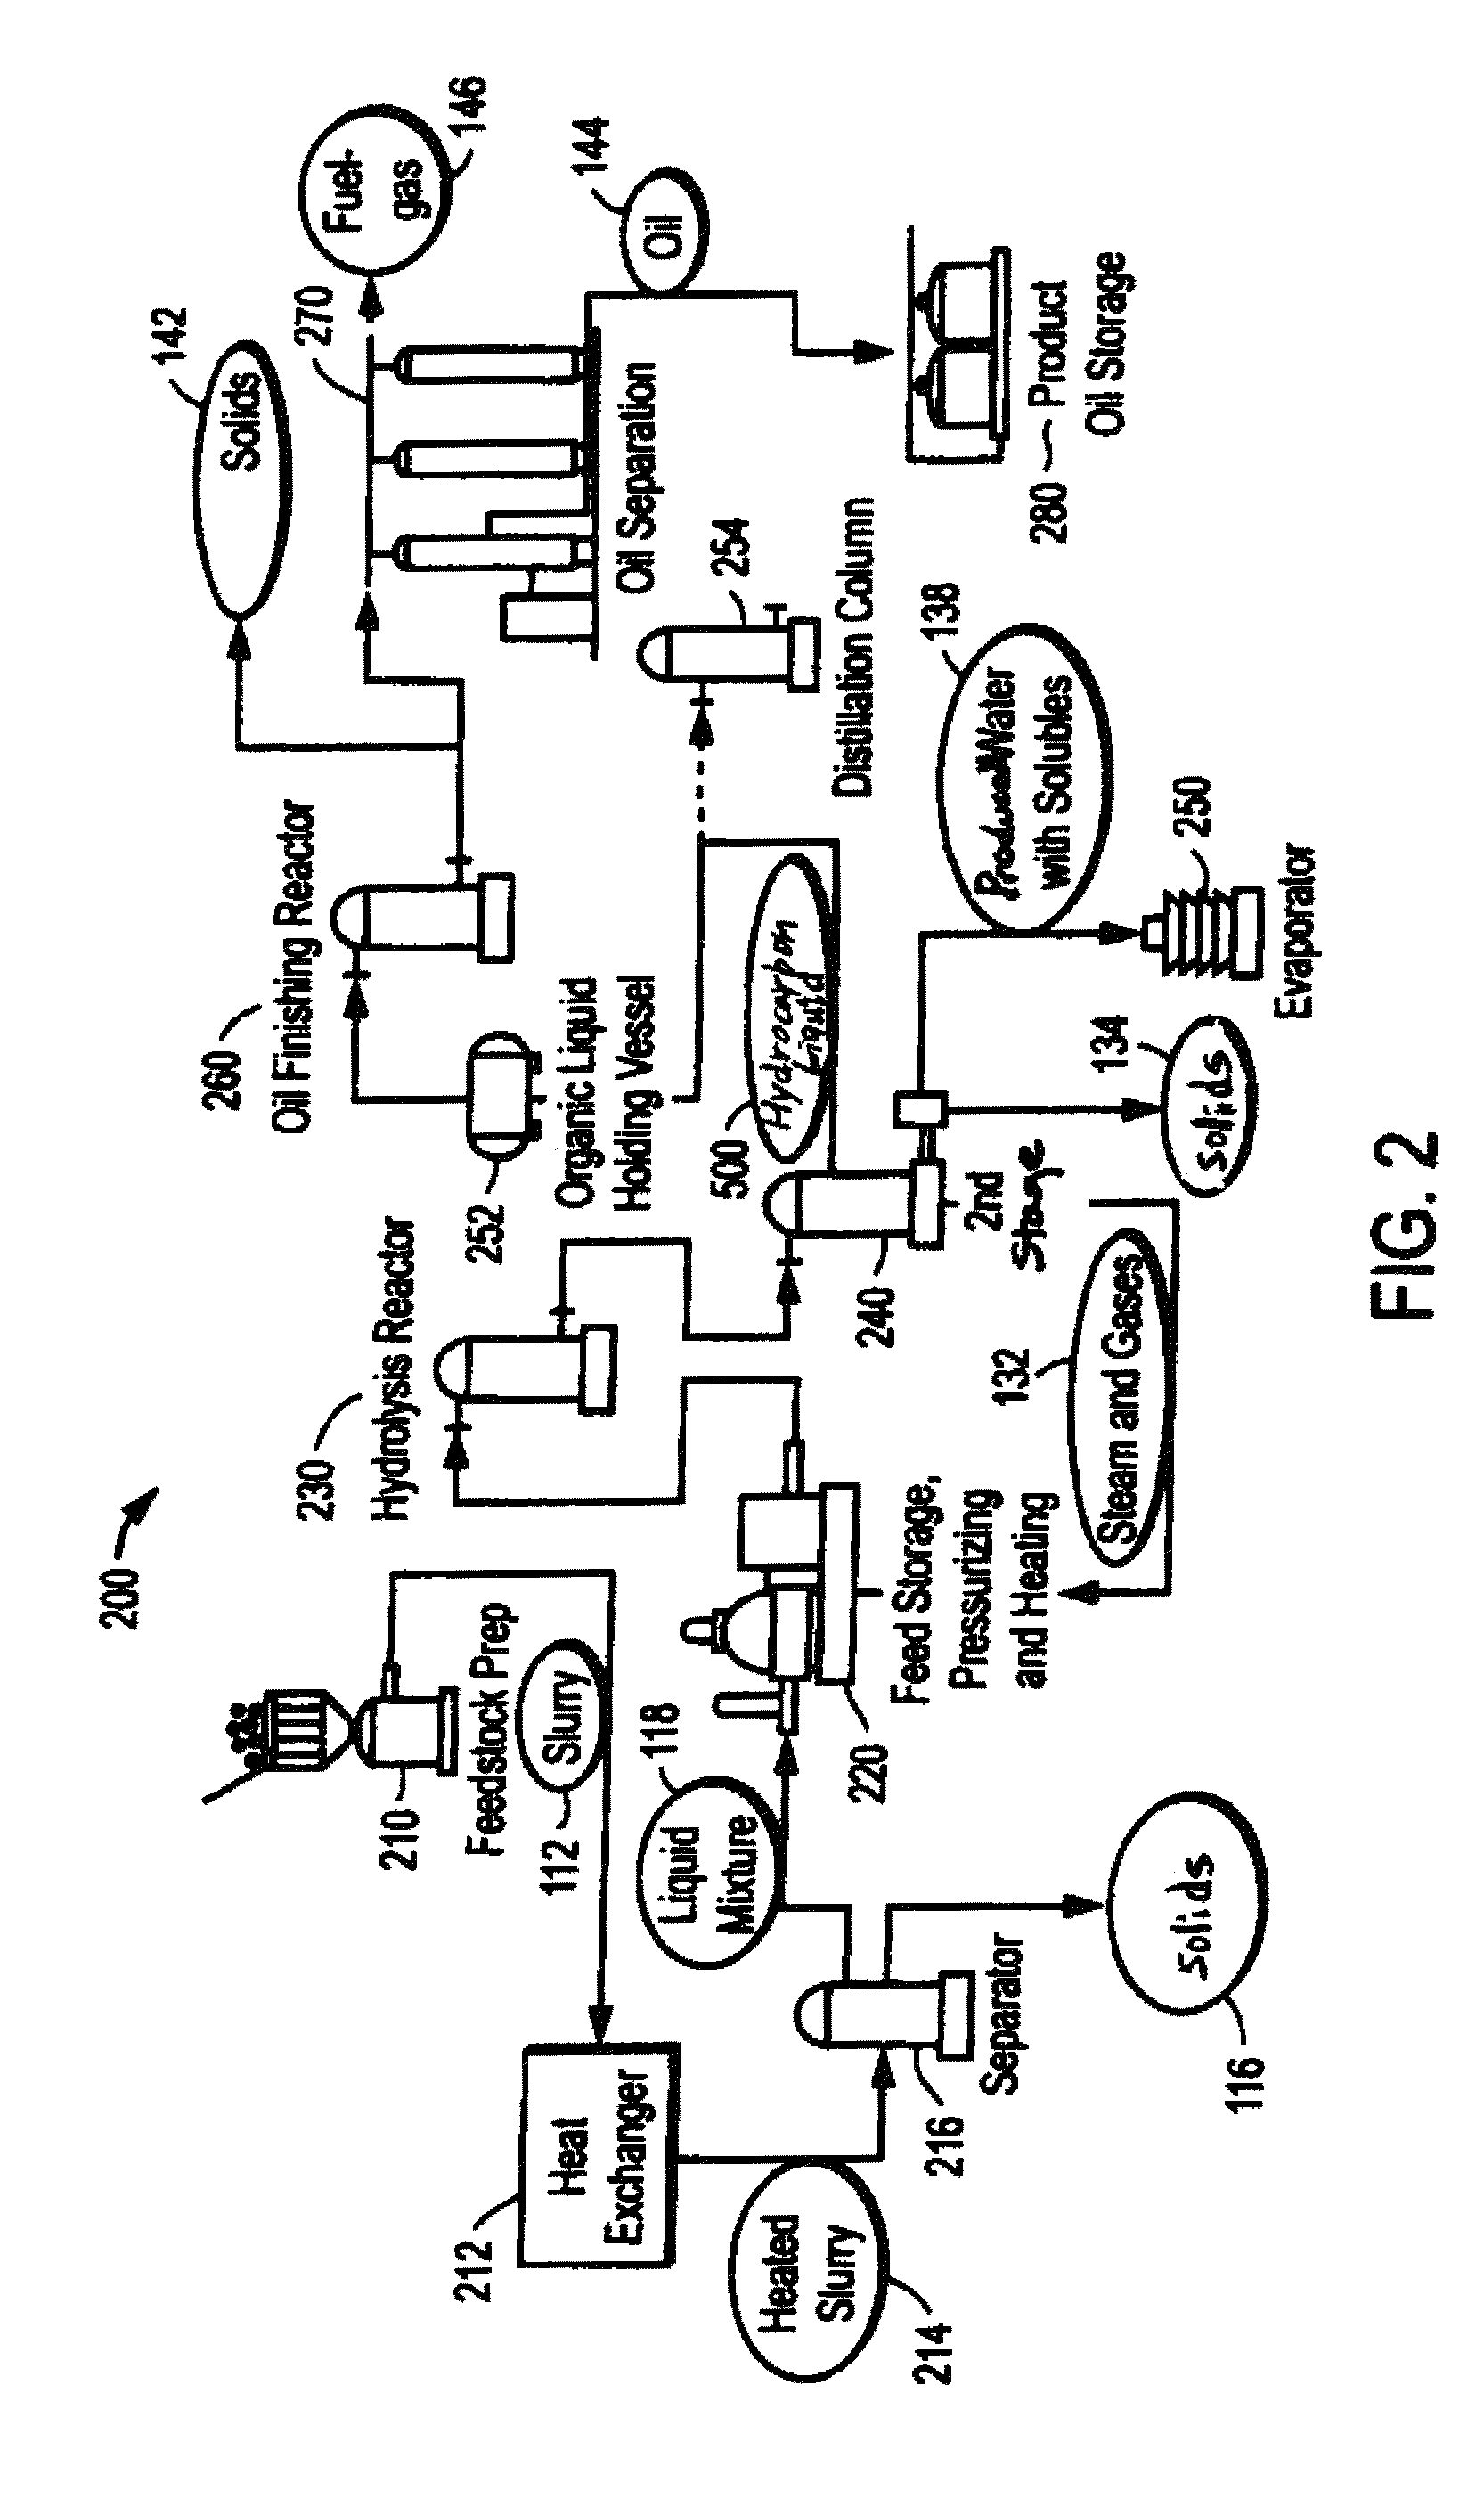 Methods and apparatus for converting waste materials into fuels and other useful products